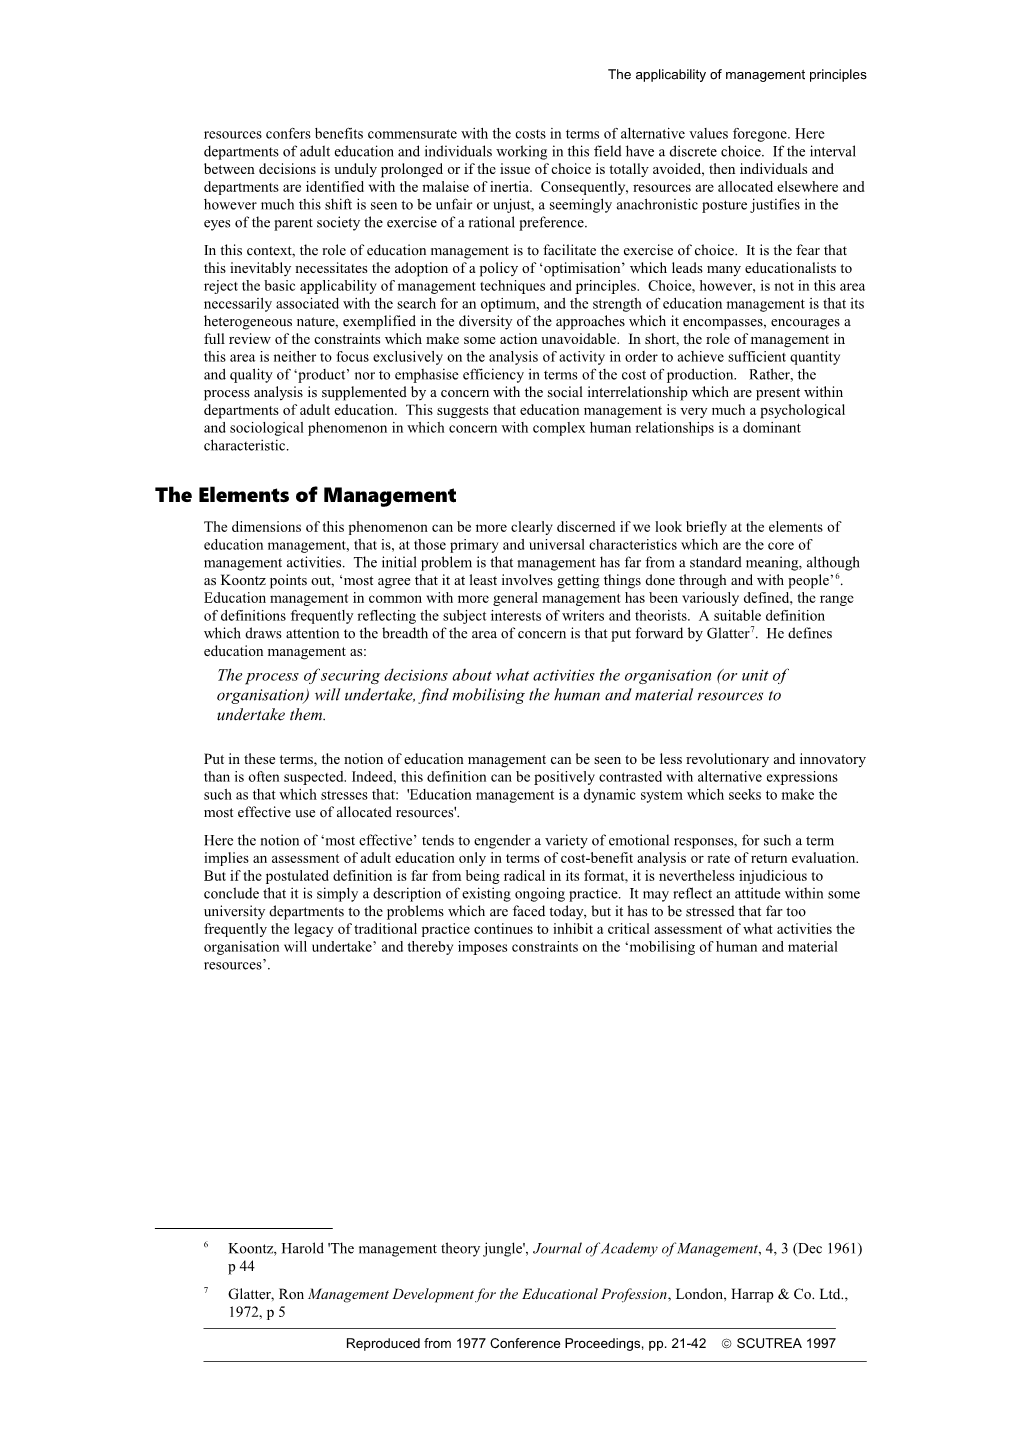 The Applicability of Management Principles Within University Departments of Adult Education